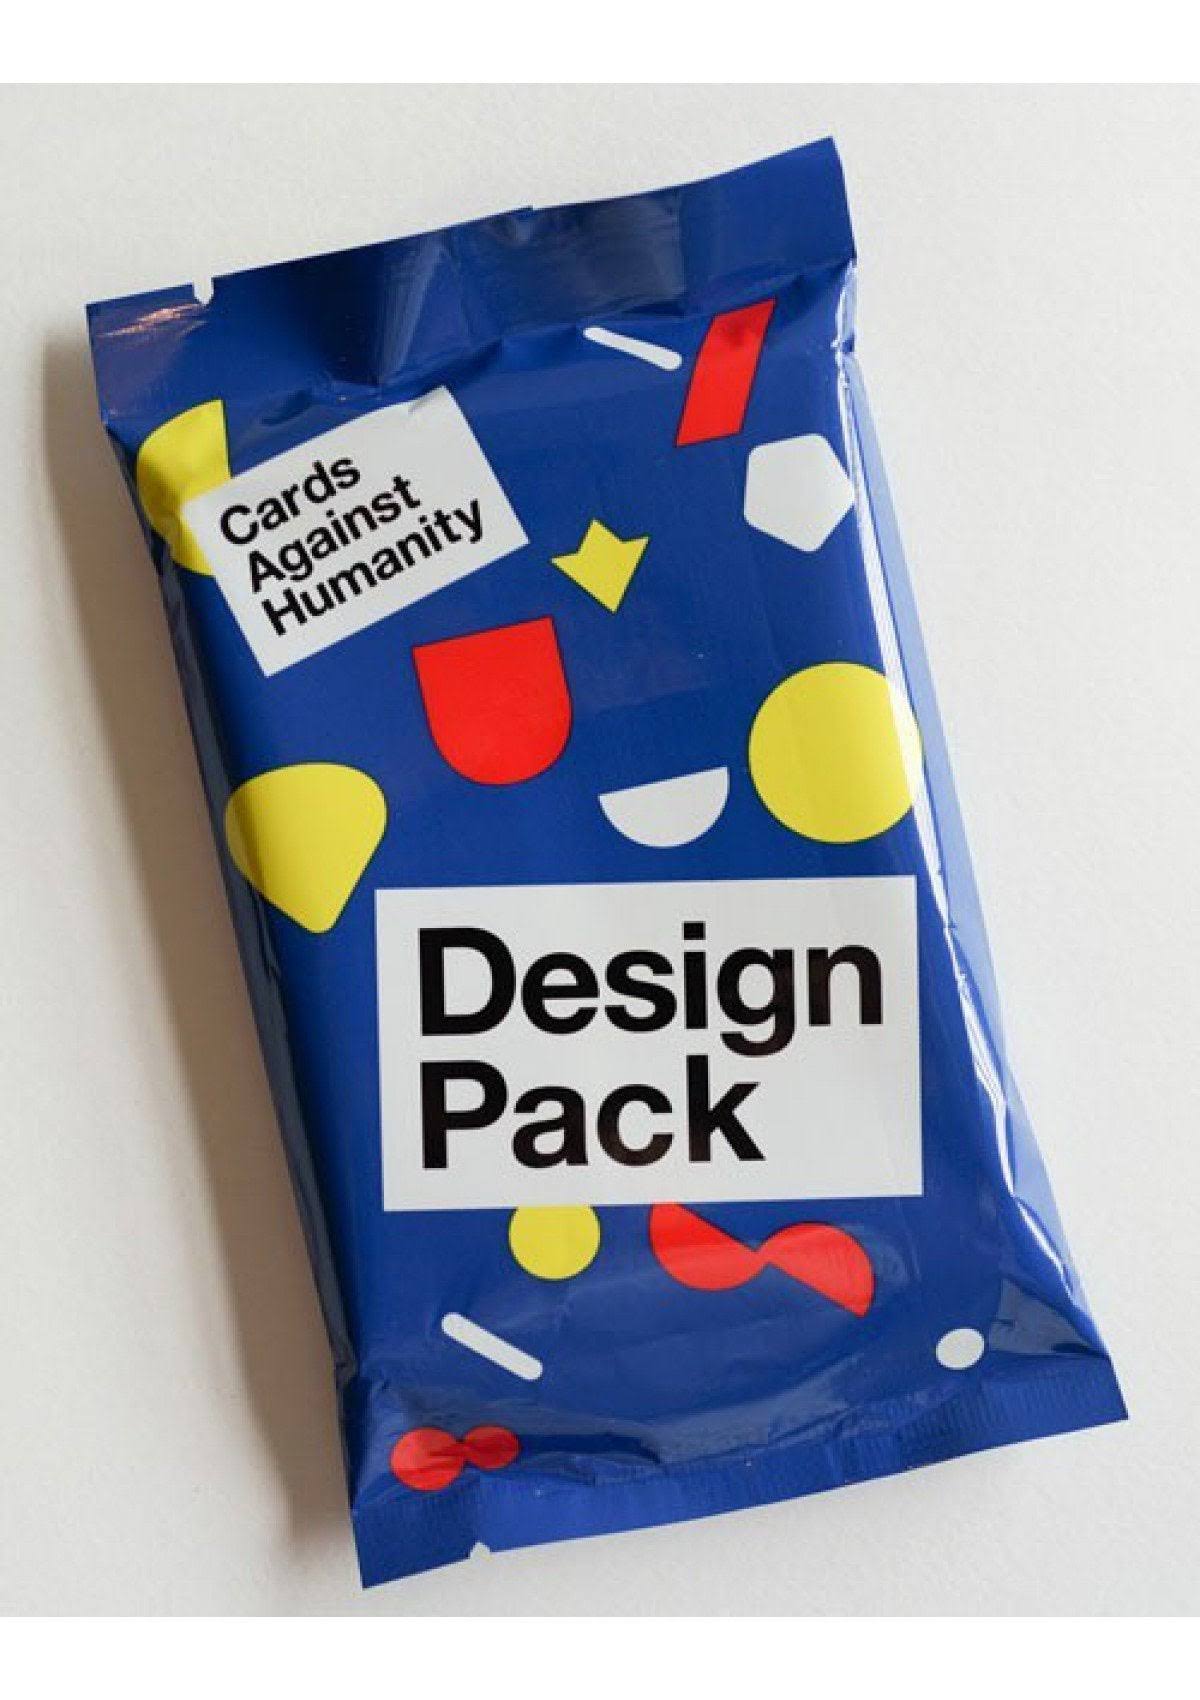 Cards Against Humanity Design Pack